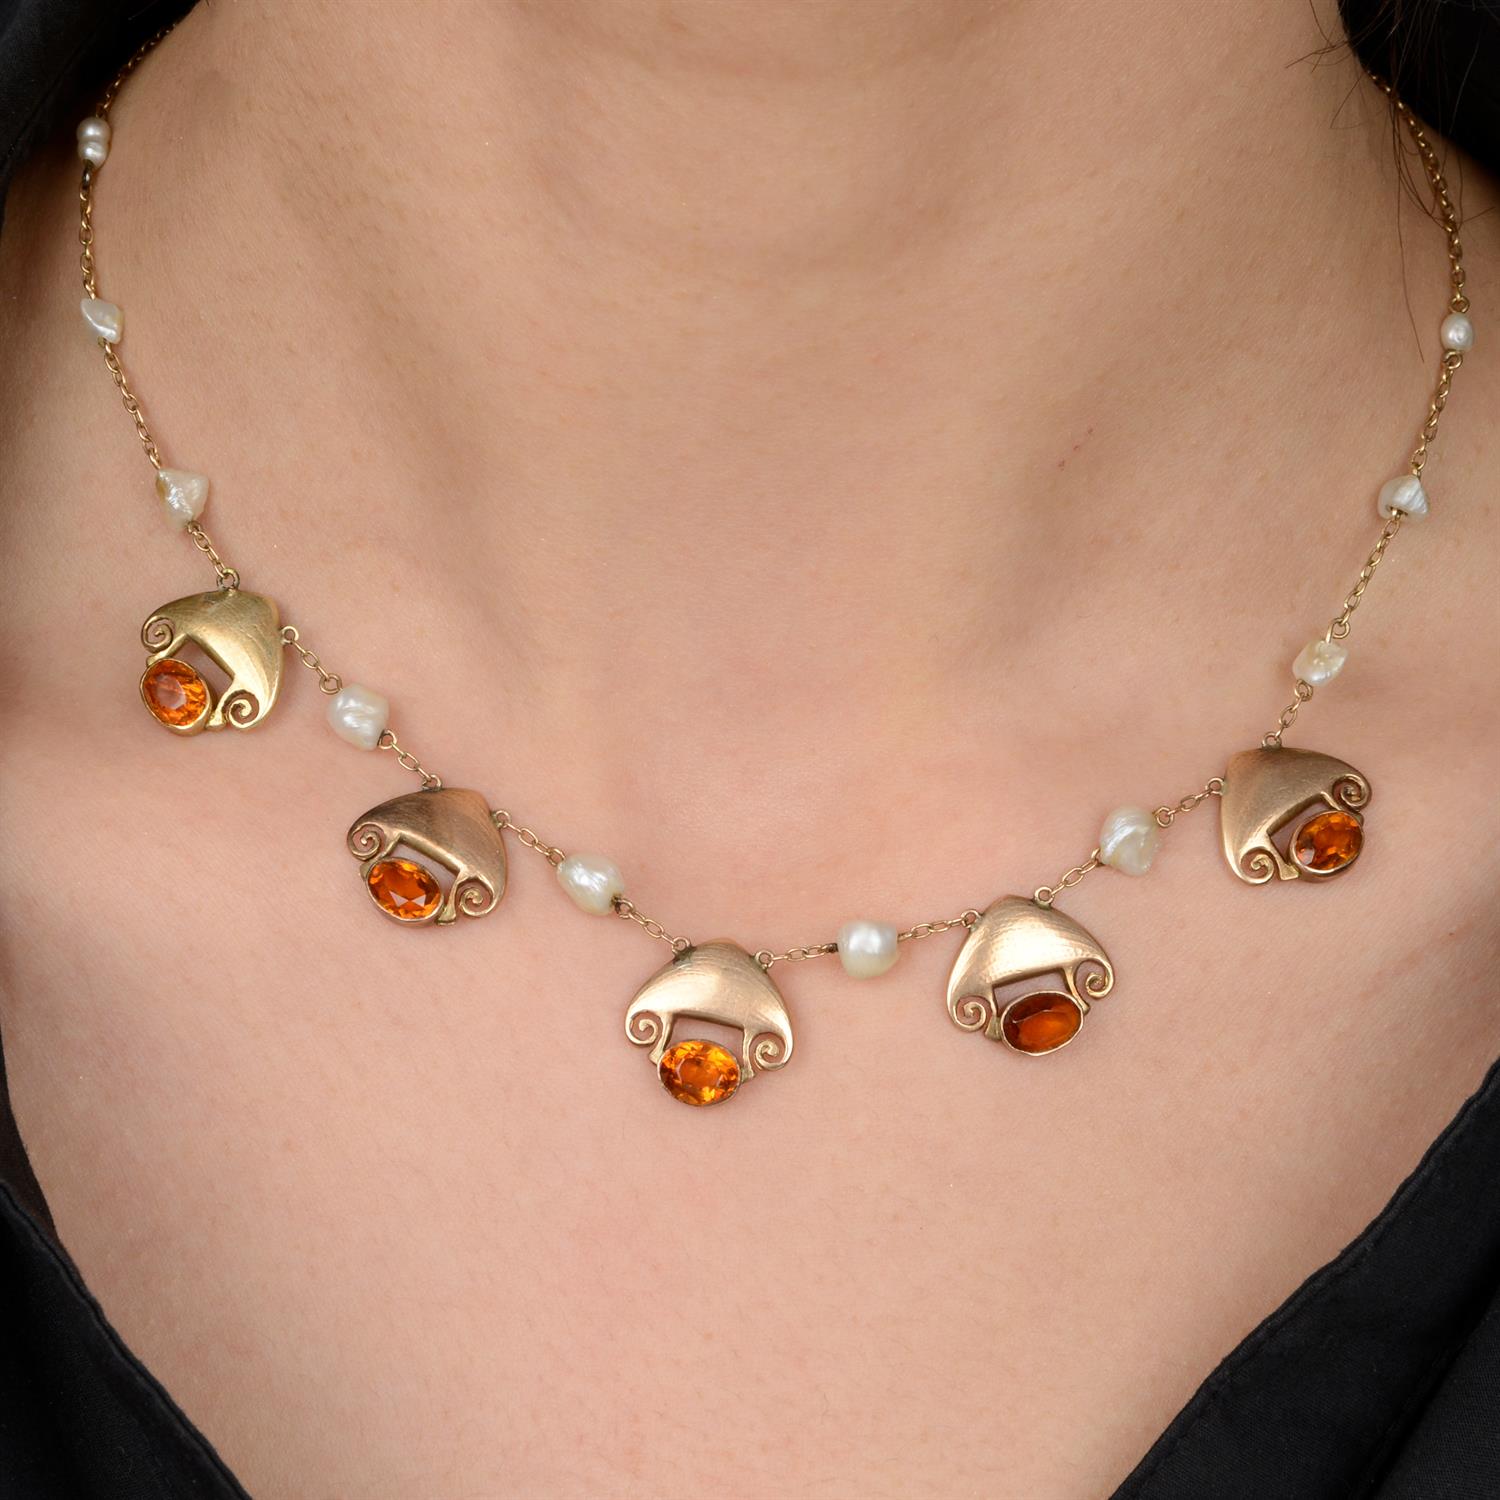 Citrine and baroque pearl necklace, by Liberty & Co.